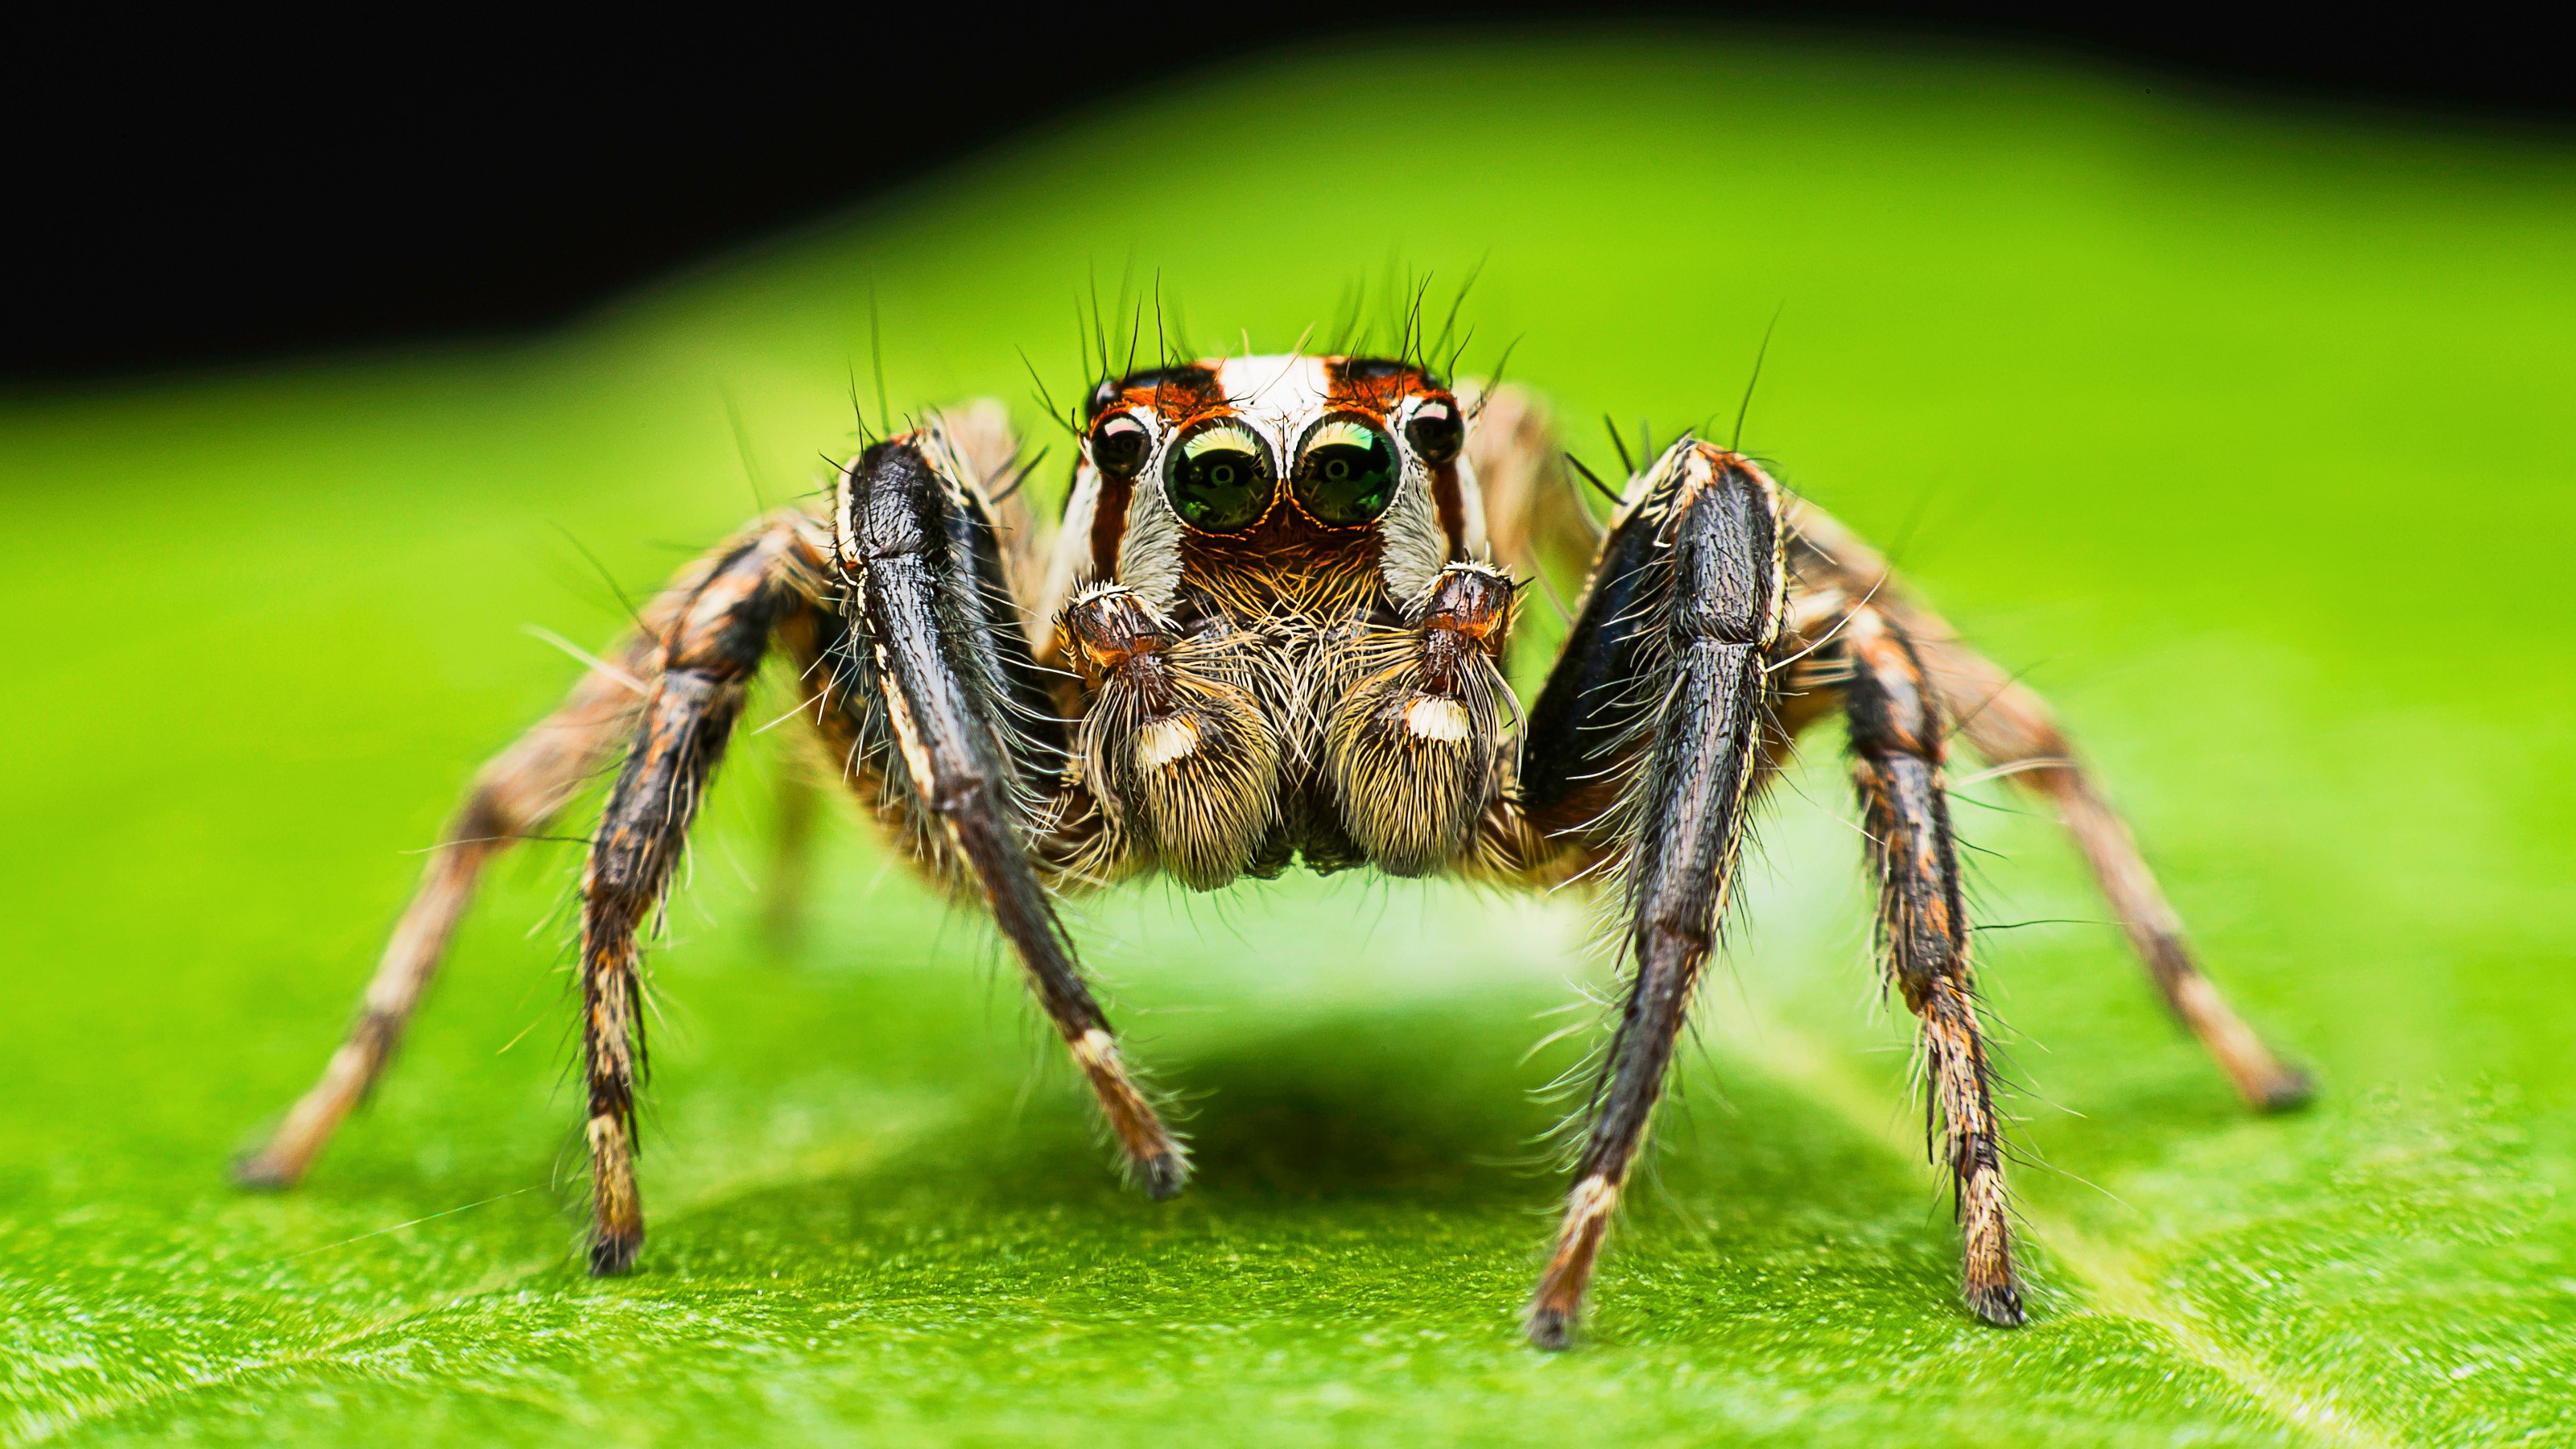 Close-up of a jumping spider on a green leaf.